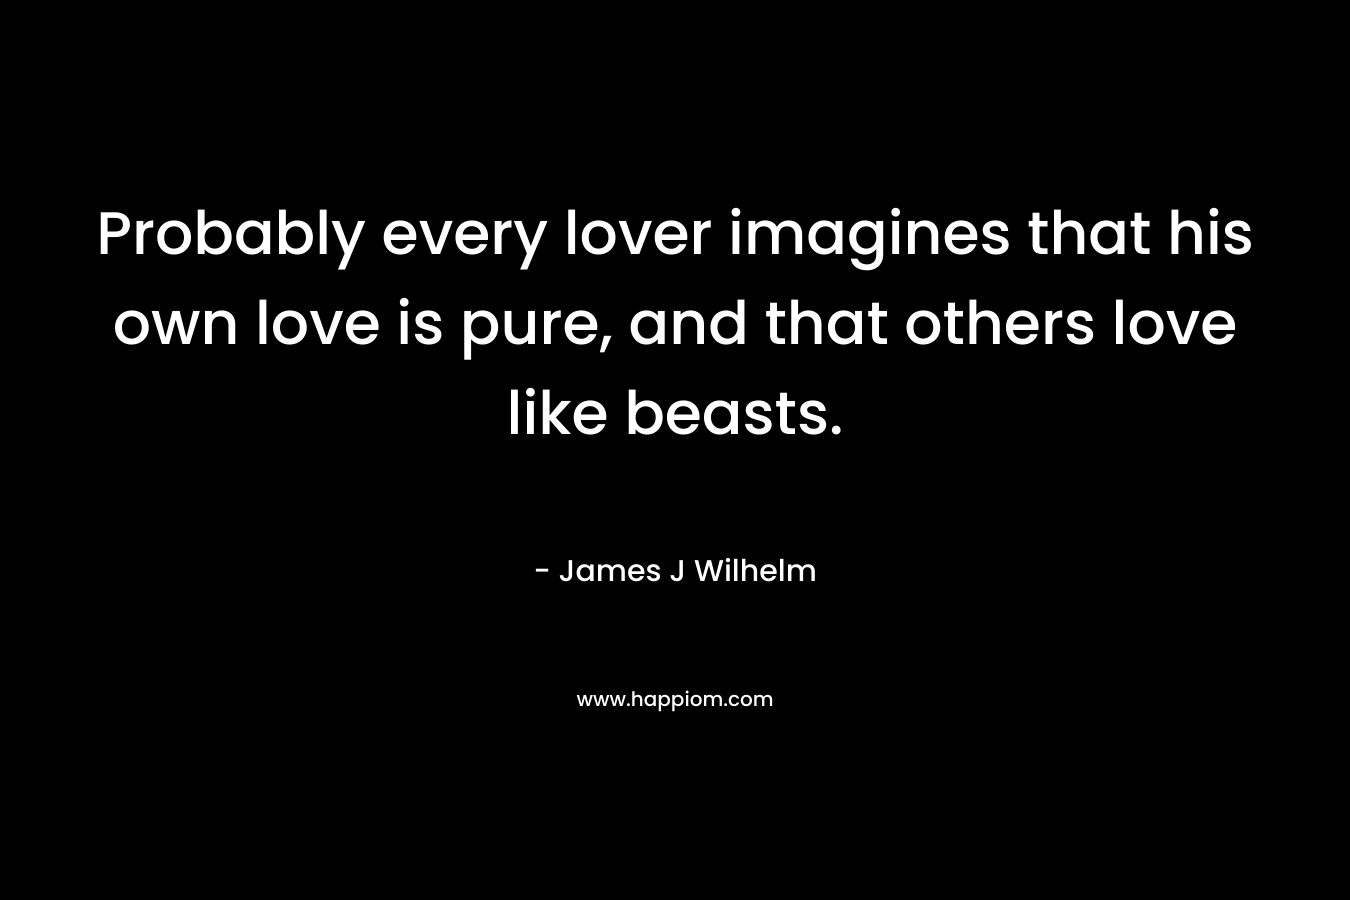 Probably every lover imagines that his own love is pure, and that others love like beasts.